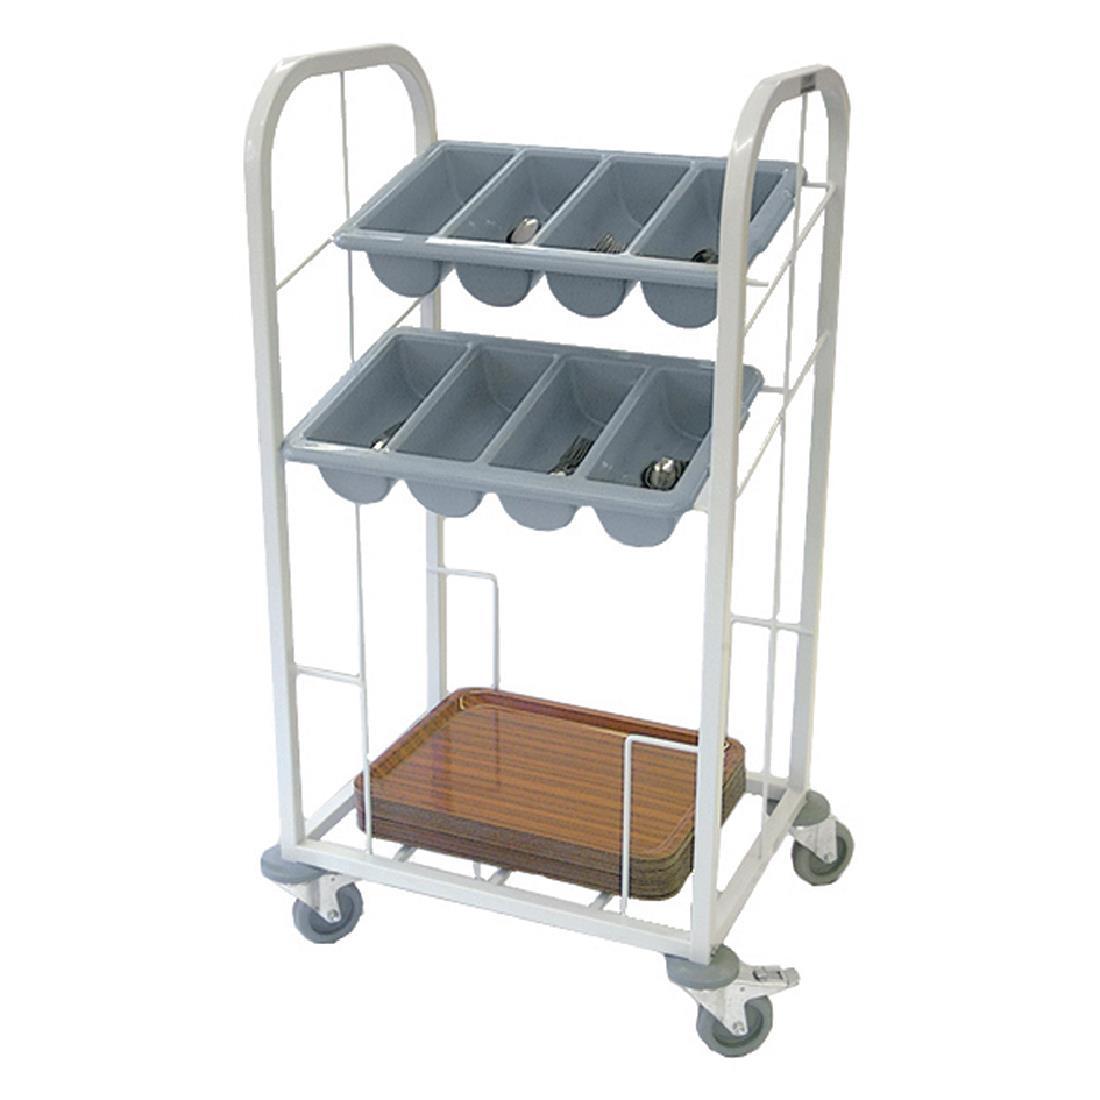 GG139 - Craven Two Tier Cutlery & Tray Dispense Trolley